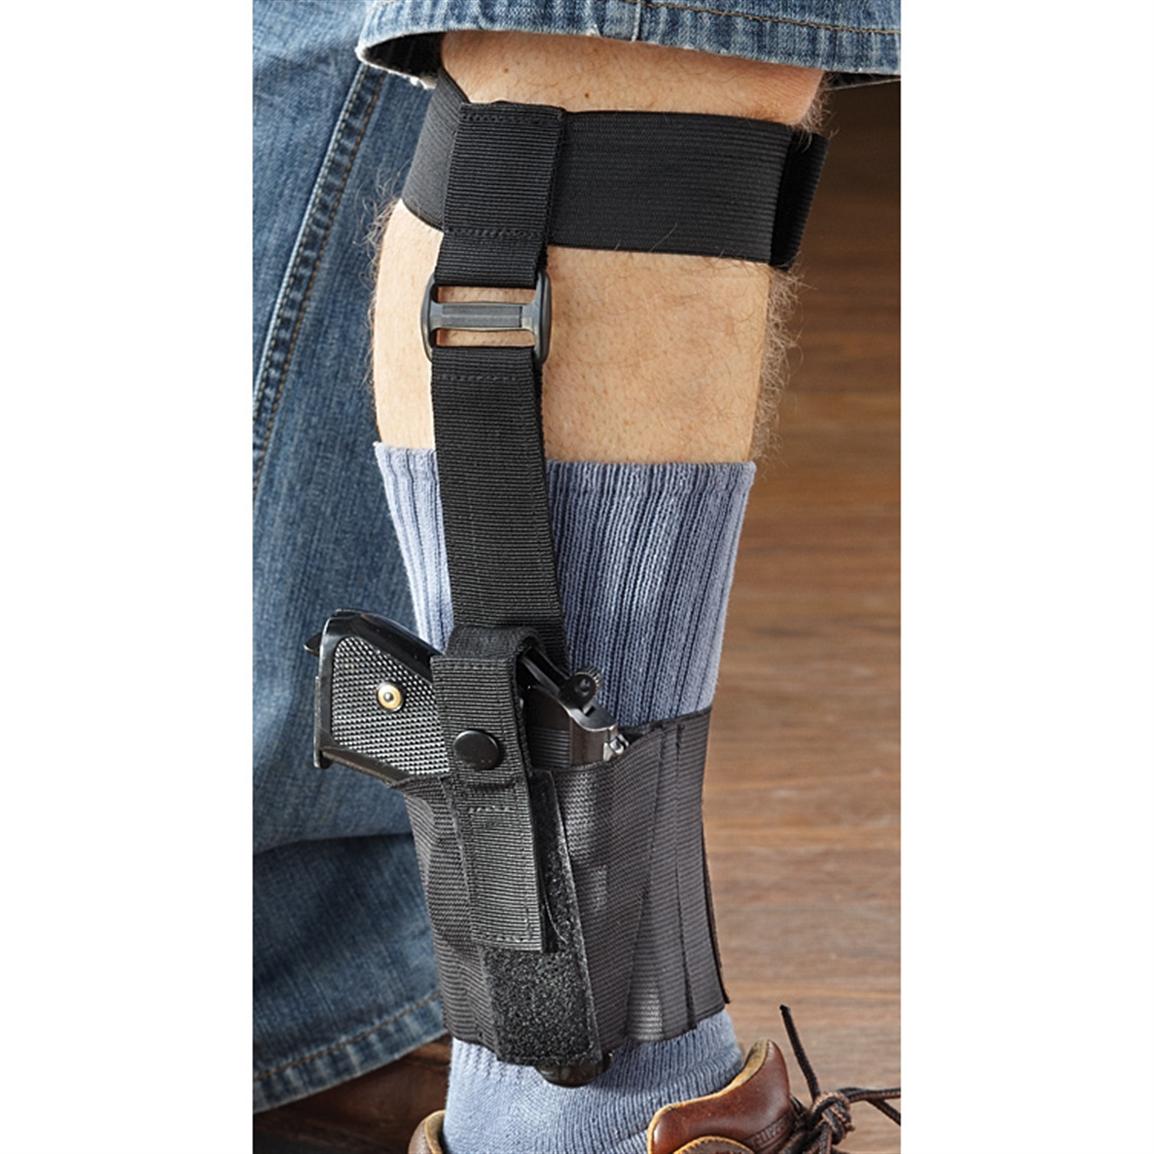 Fox Tactical Small Frame Ankle Holster - 208287, Holsters at Sportsman's Guide1154 x 1154